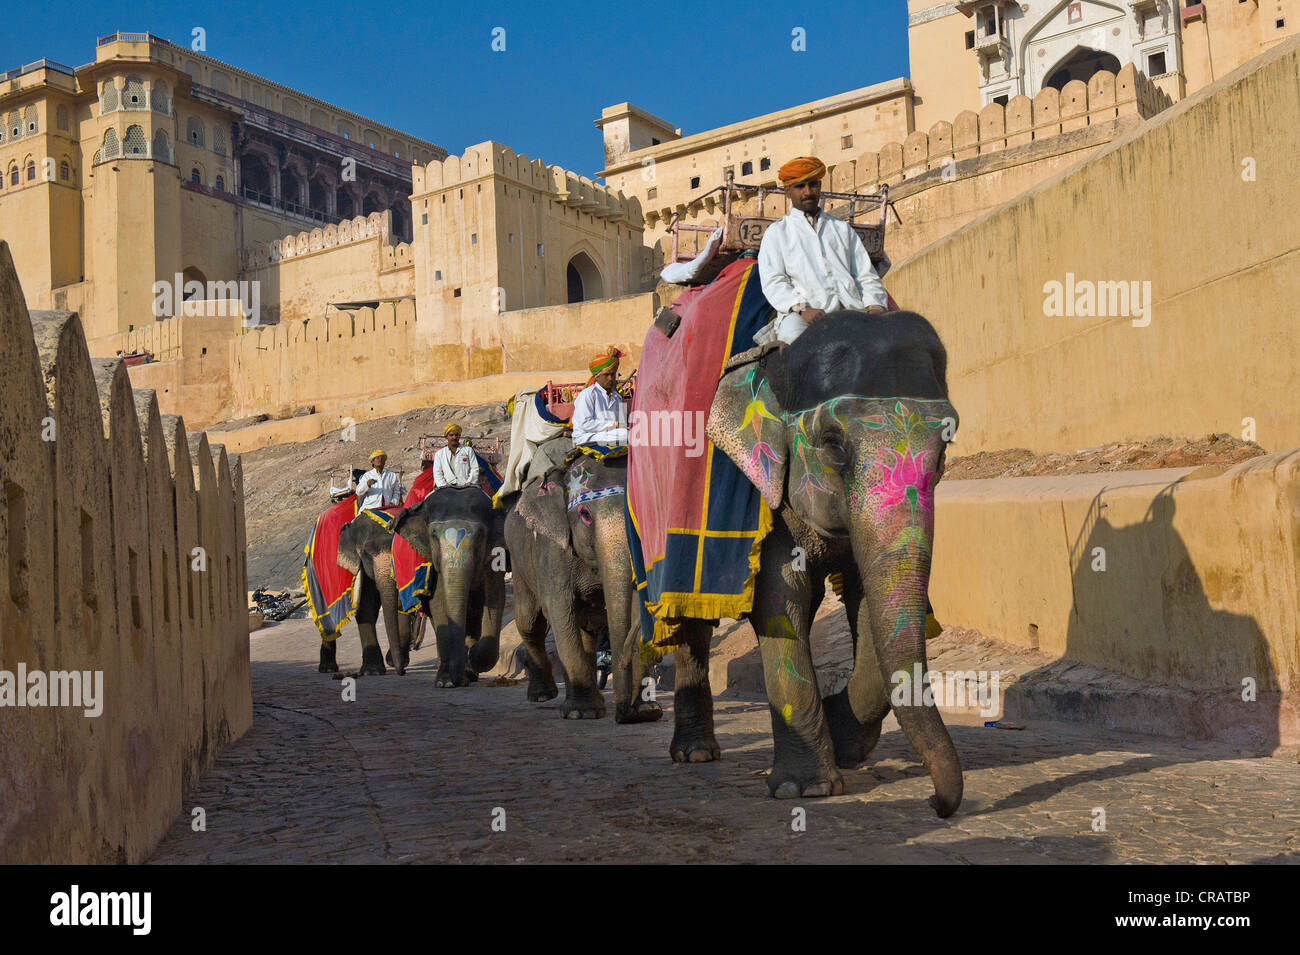 Painted elephants and mahouts, Amber Fort, Jaipur, Rajasthan, India, Asia Stock Photo